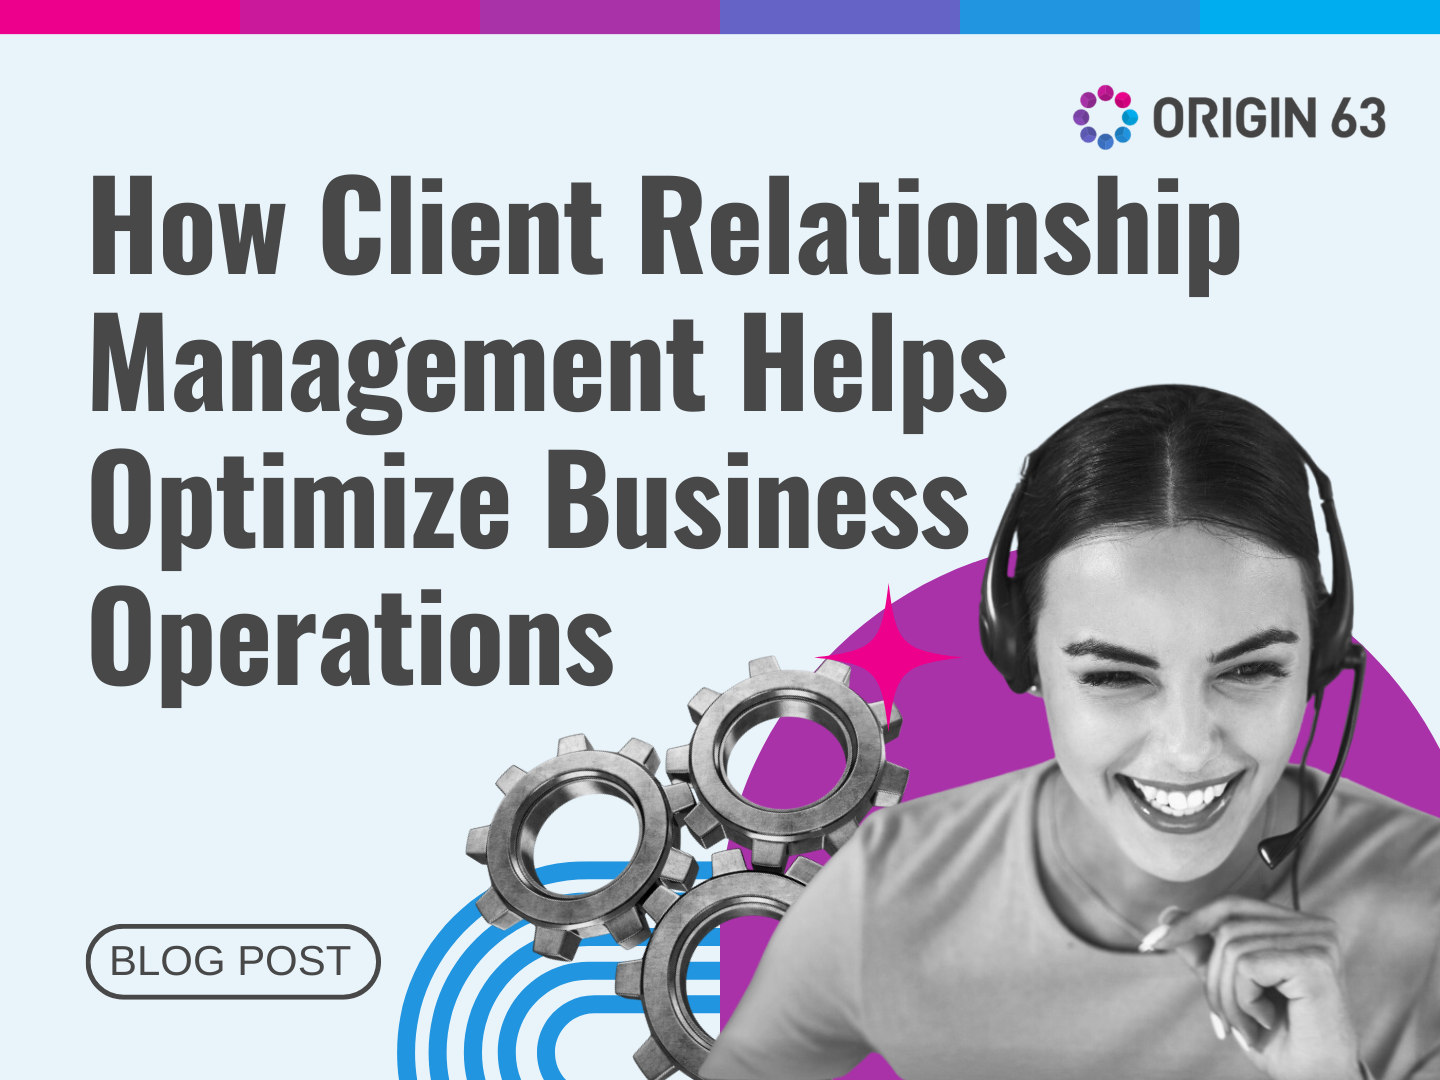 How Client Relationship Management Helps Optimize Business Operations